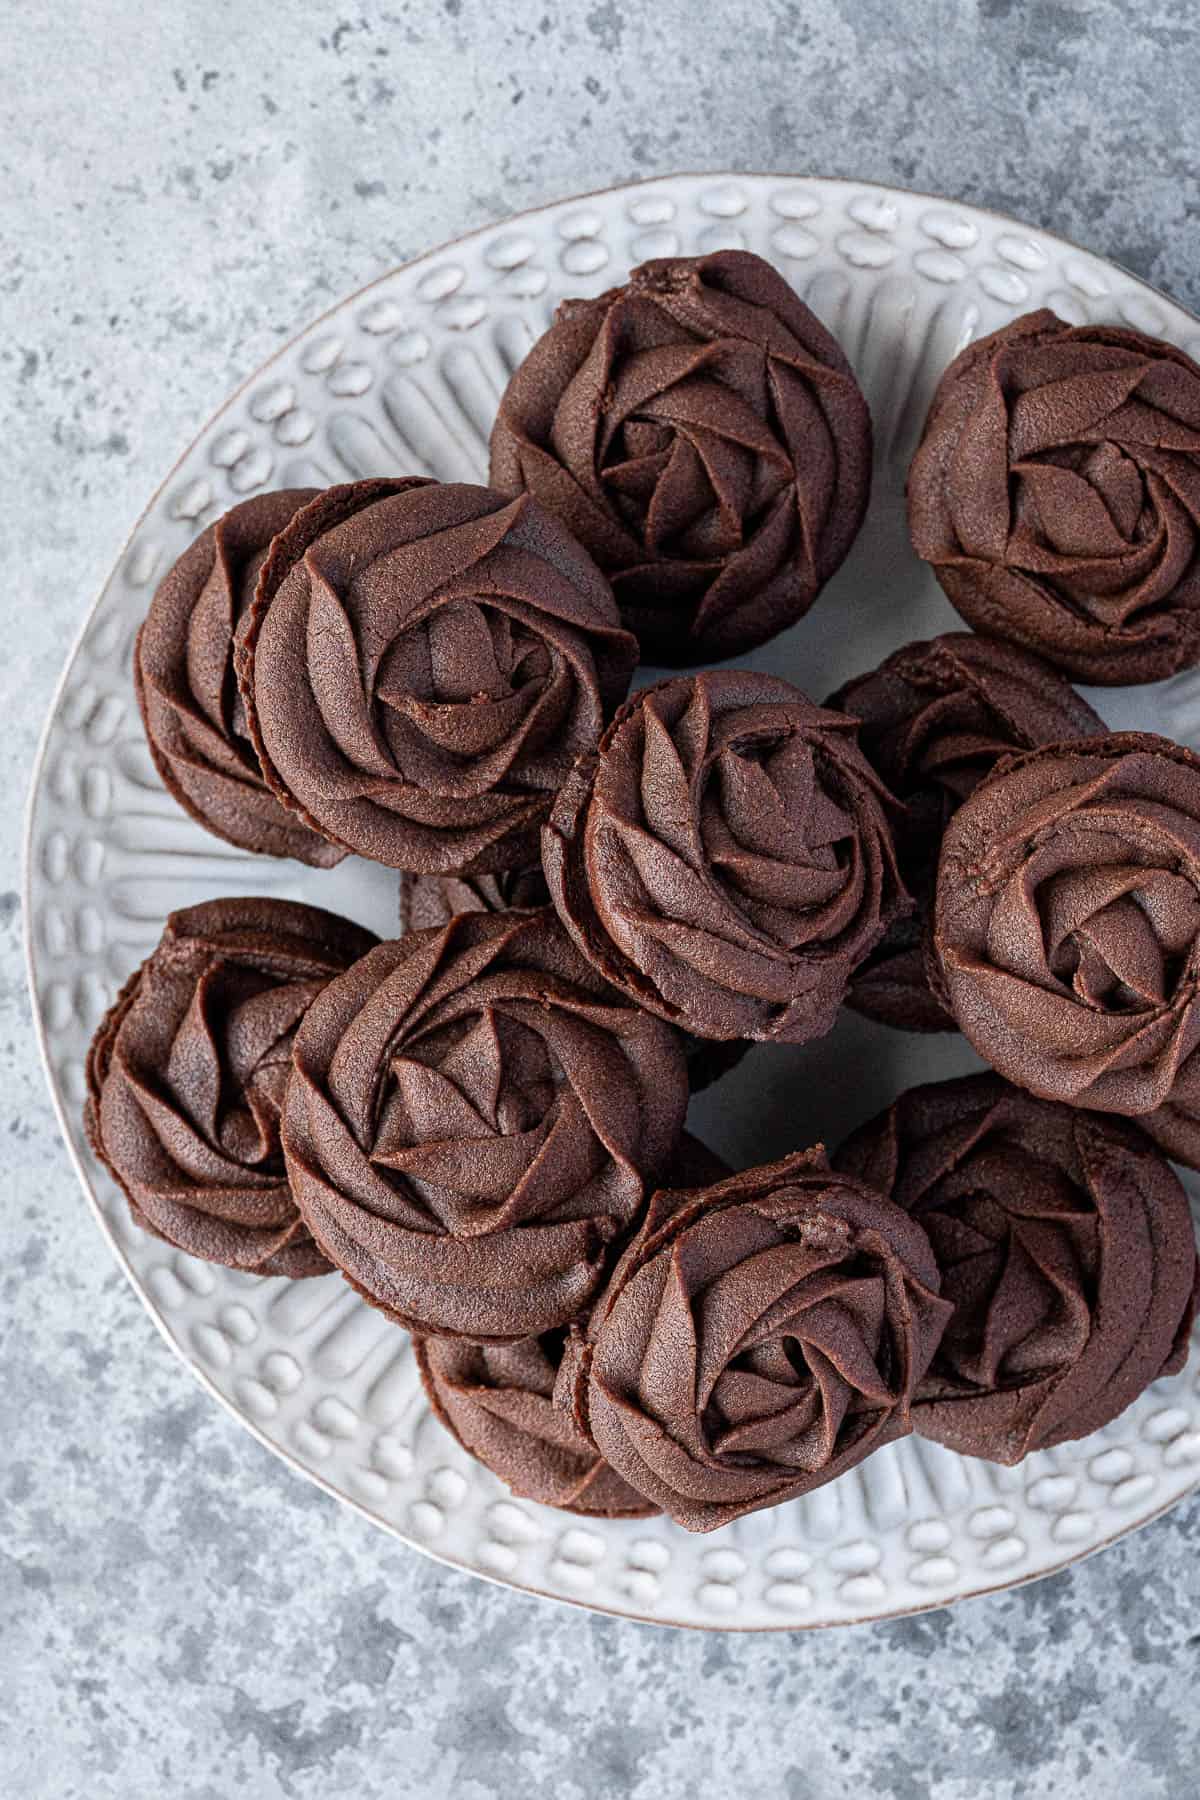 A plate of chocolate Viennese whirl biscuits.